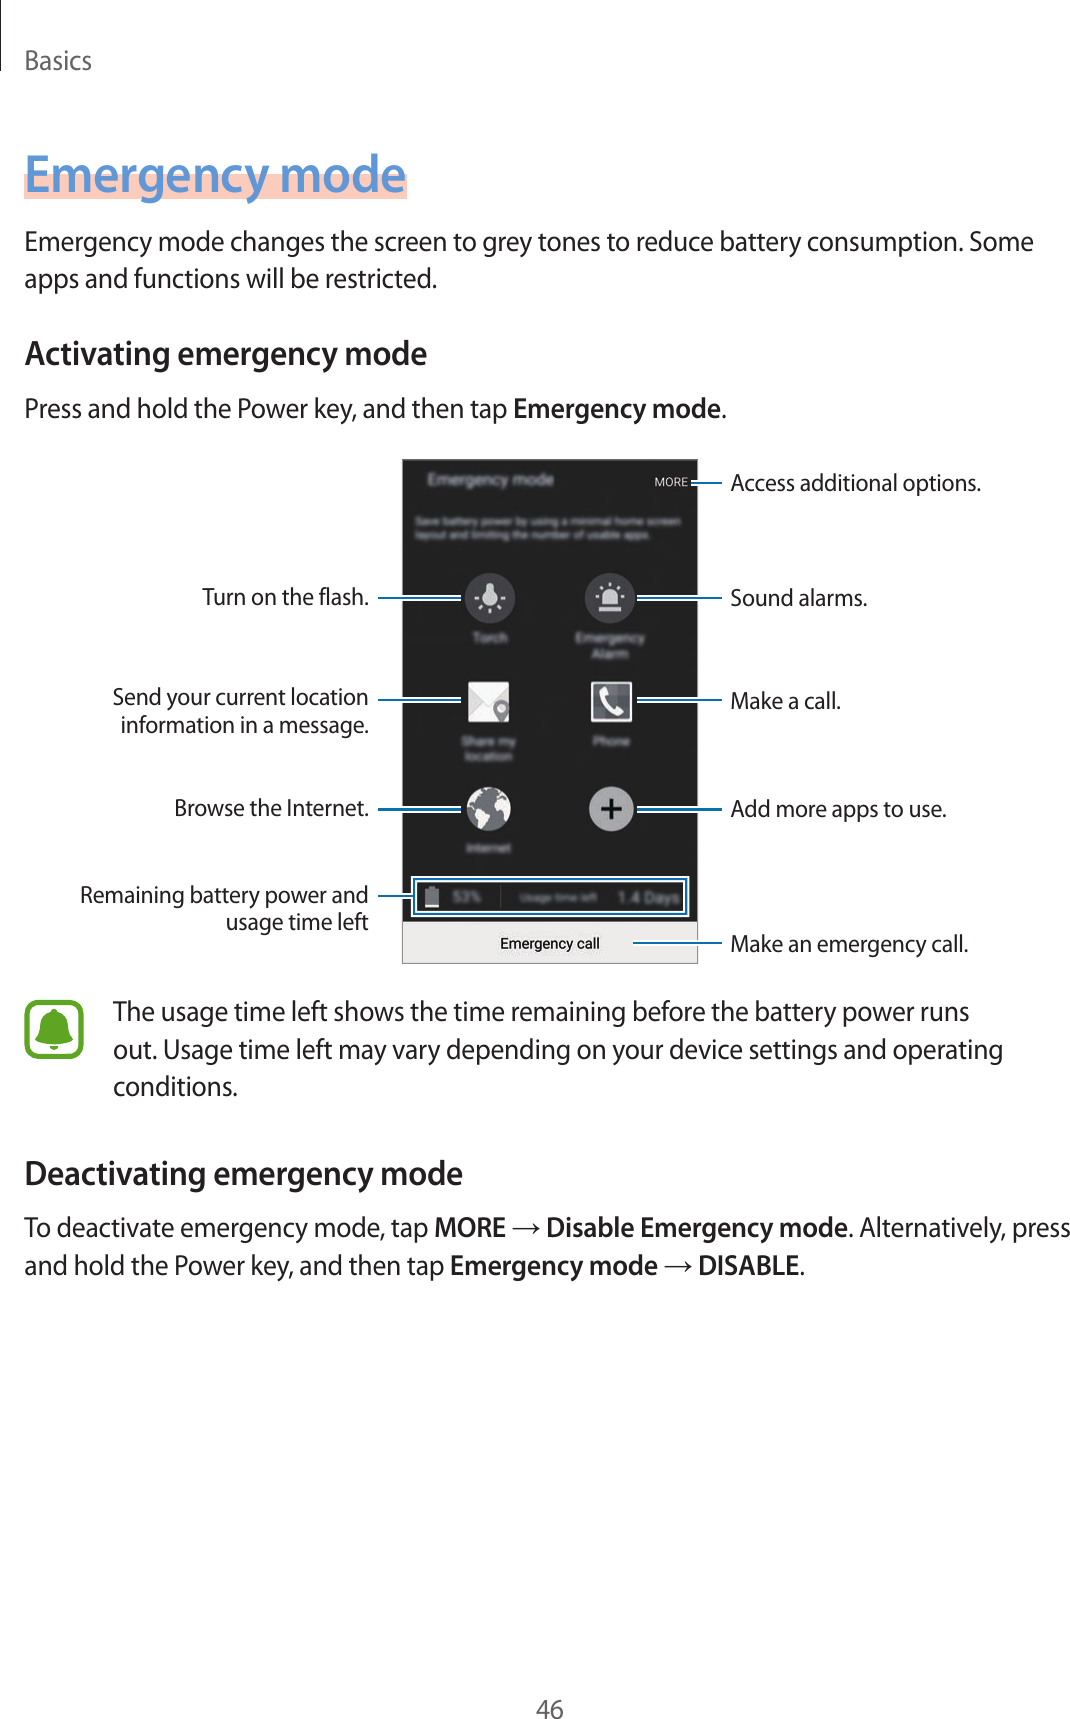 Basics46Emergency modeEmergency mode changes the screen to gr ey t ones to r educ e batt ery consumption. Some apps and functions will be restricted .Activating emer gency modePr ess and hold the Pow er key, and then tap Emergency mode.Add mor e apps to use .Make an emergency call.Remaining battery power and usage time leftTurn on the flash.Make a call.Send your current location information in a message .Brow se the Internet.Acc ess additional options .Sound alarms.The usage time left shows the time r emaining bef or e the batt ery power runs out. Usage time left may vary depending on your device settings and operating conditions.Deactiva ting emer gency modeTo deactivate emergency mode, tap MORE → Disable Emergency mode. Alternativ ely, pr ess and hold the P o w er key, and then tap Emergency mode → DISABLE.